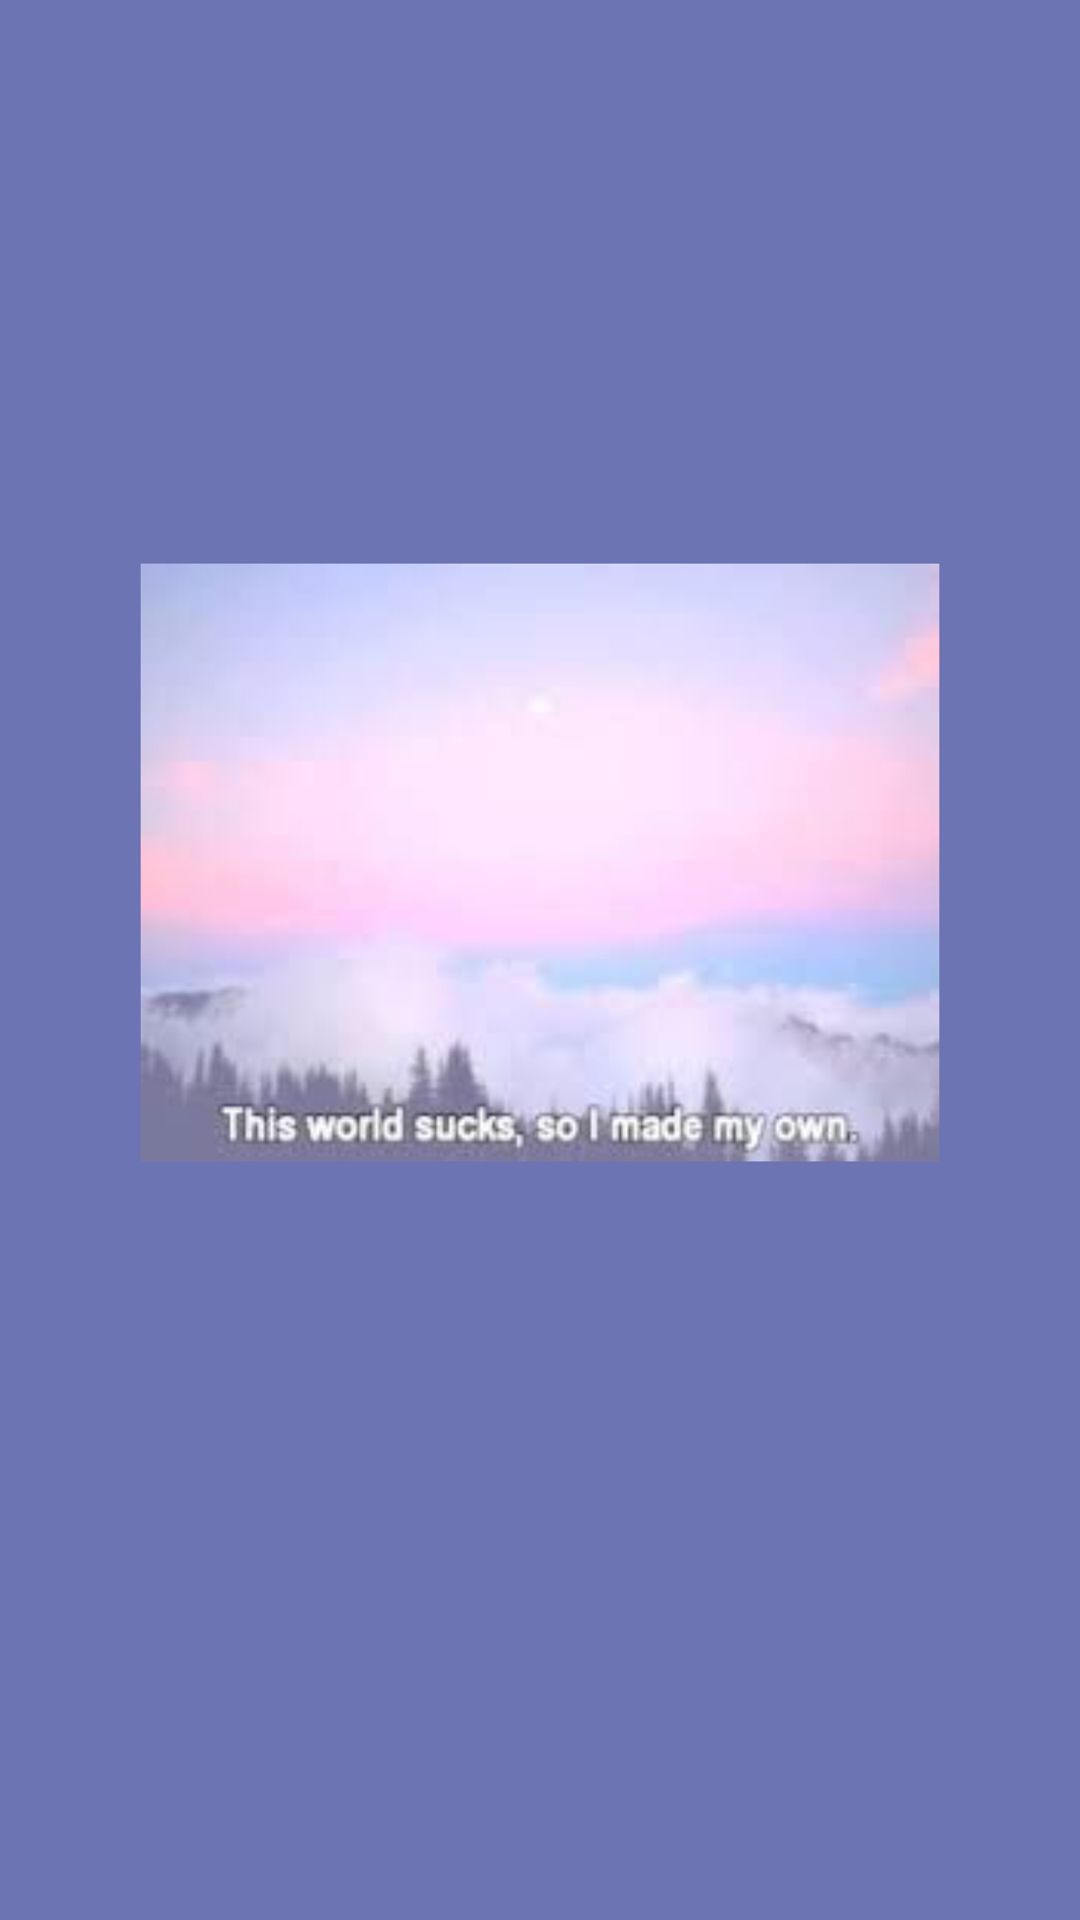 Soft aesthetic wallpapers